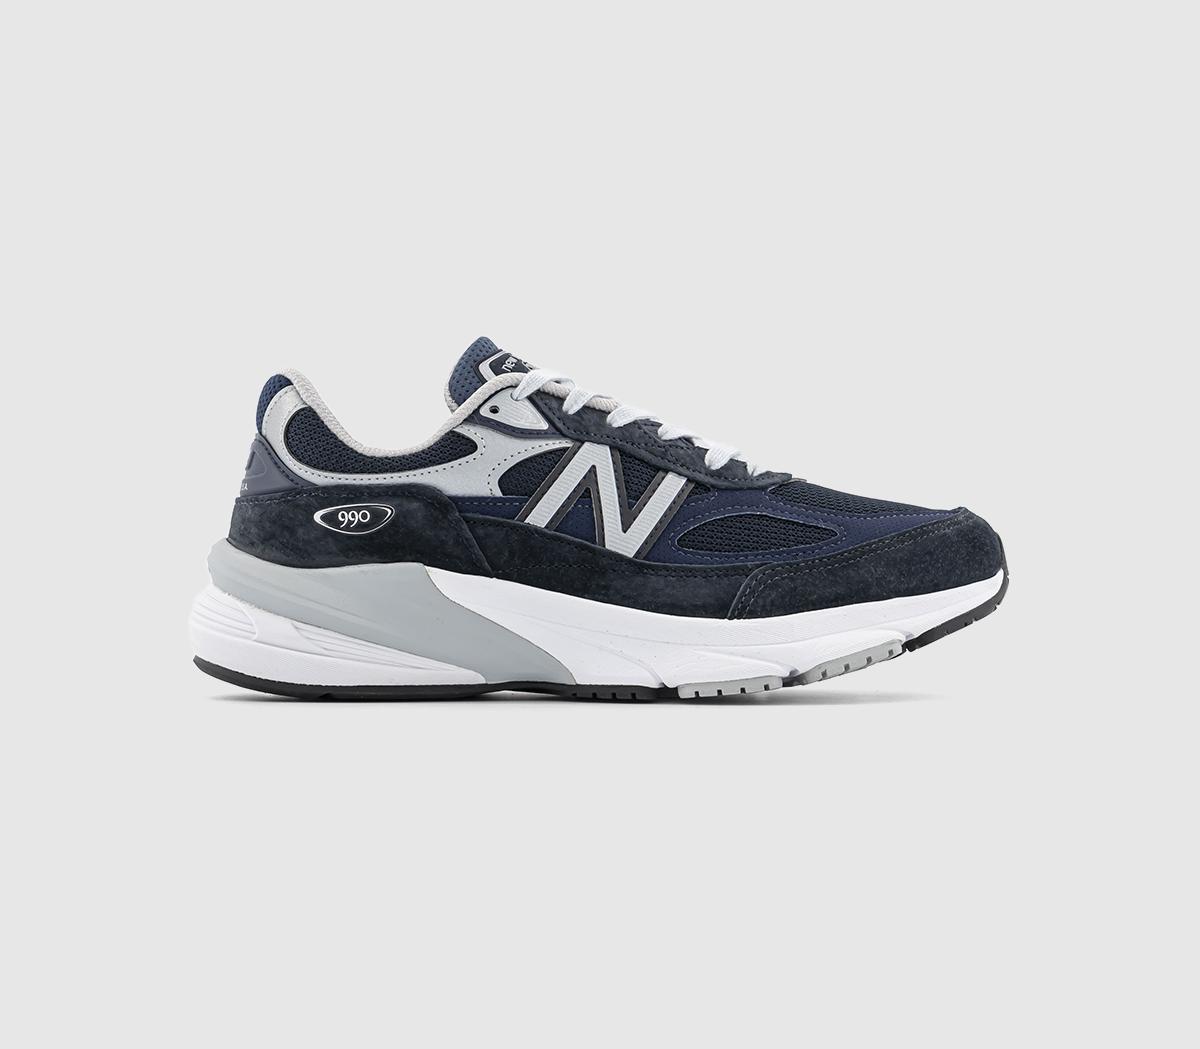 New Balance990v6 Made in USA TrainersNavy